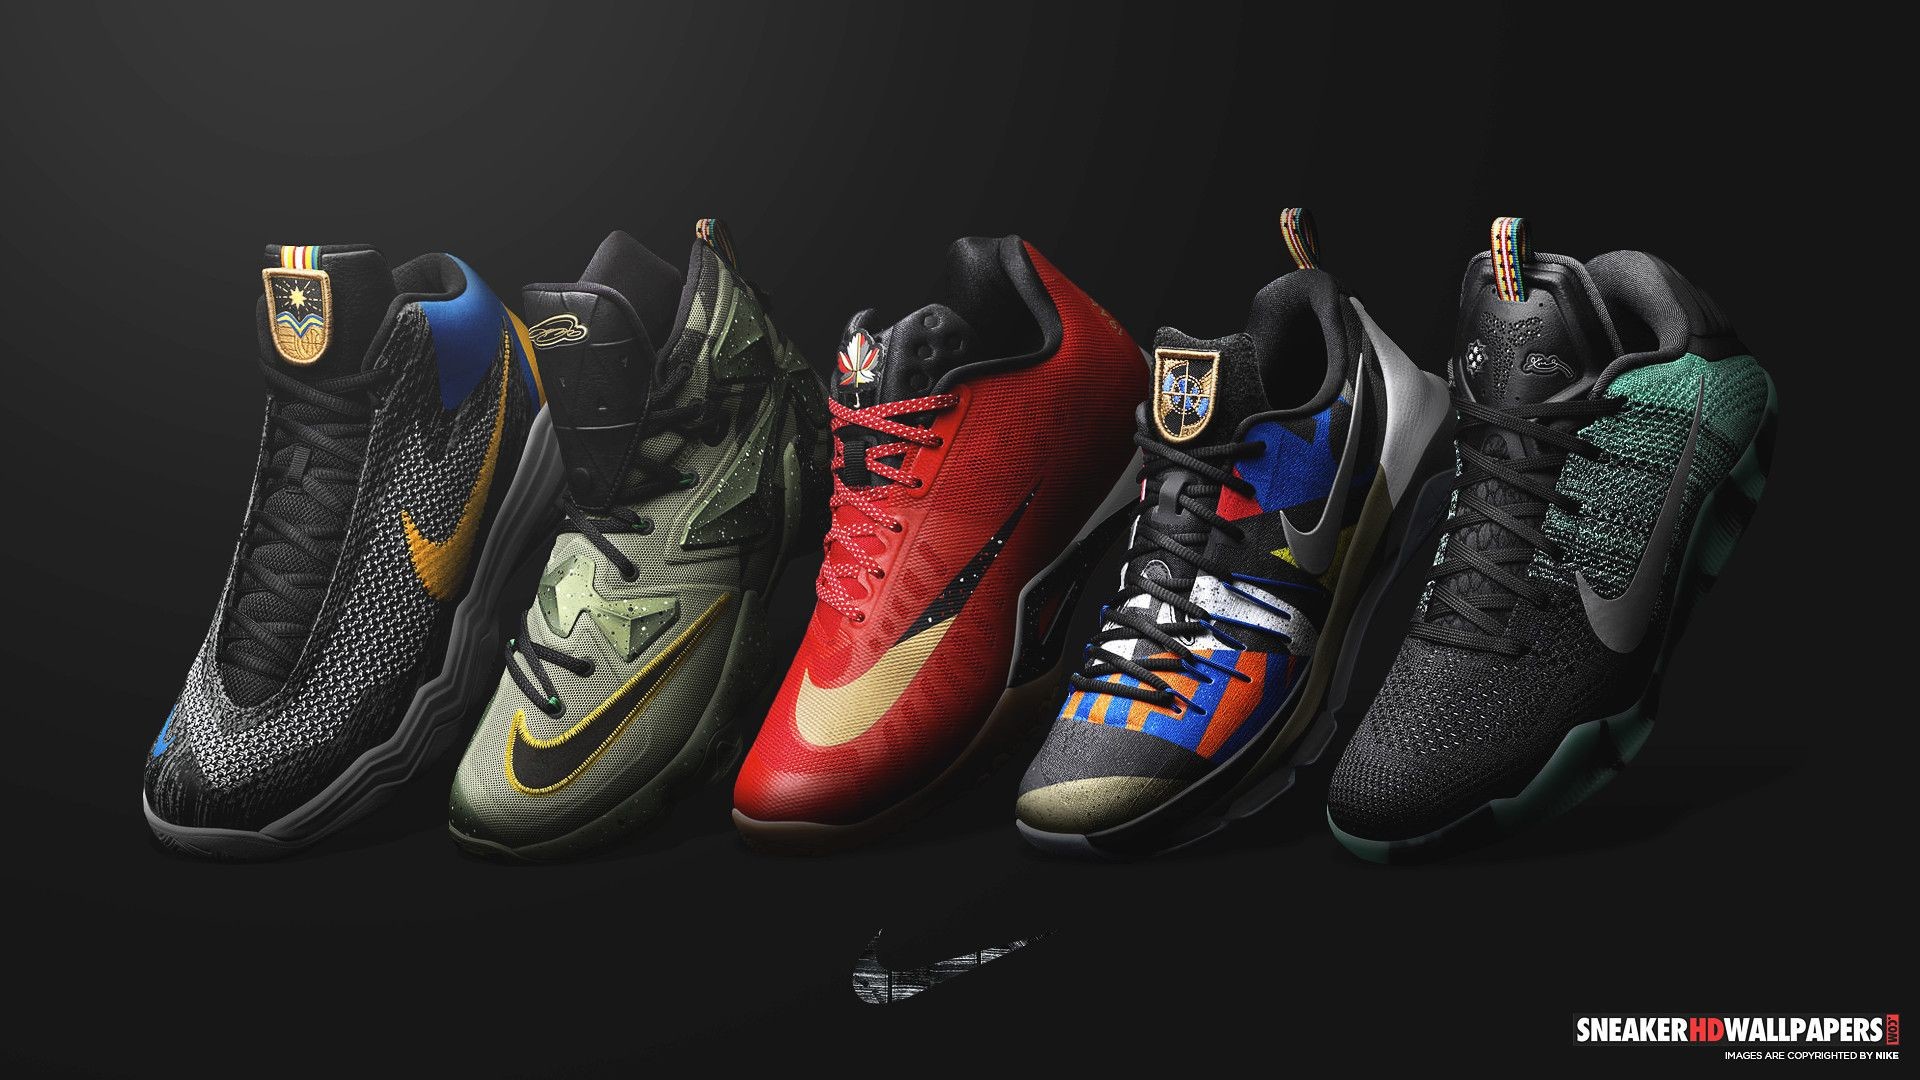 1920x1080 Basketball Shoes Wallpapers (70+ images)